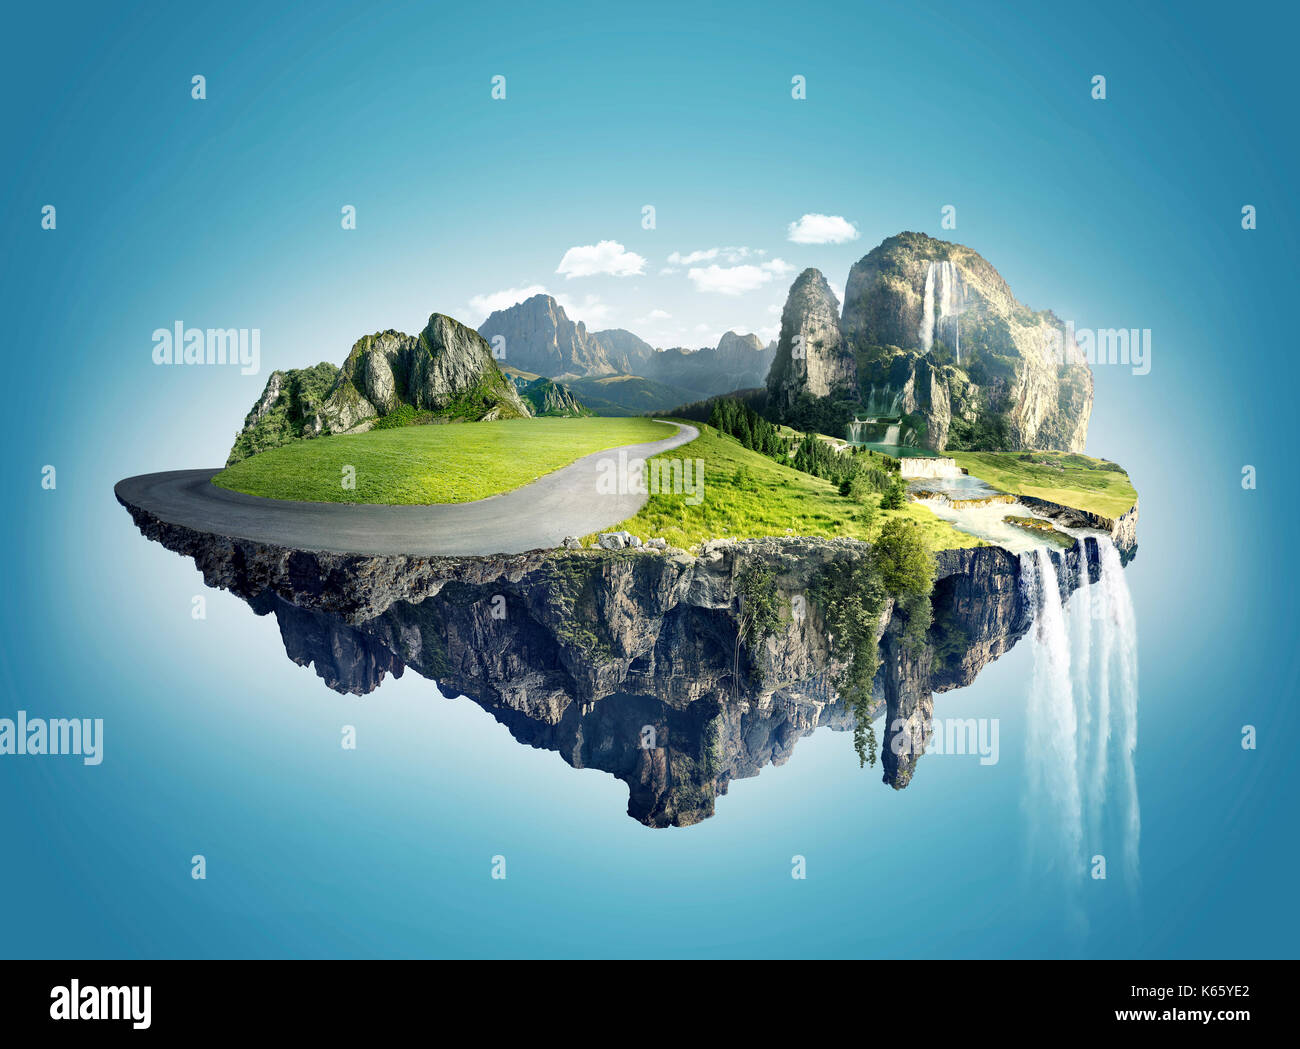 Magic island with floating islands, water fall and field Stock Photo